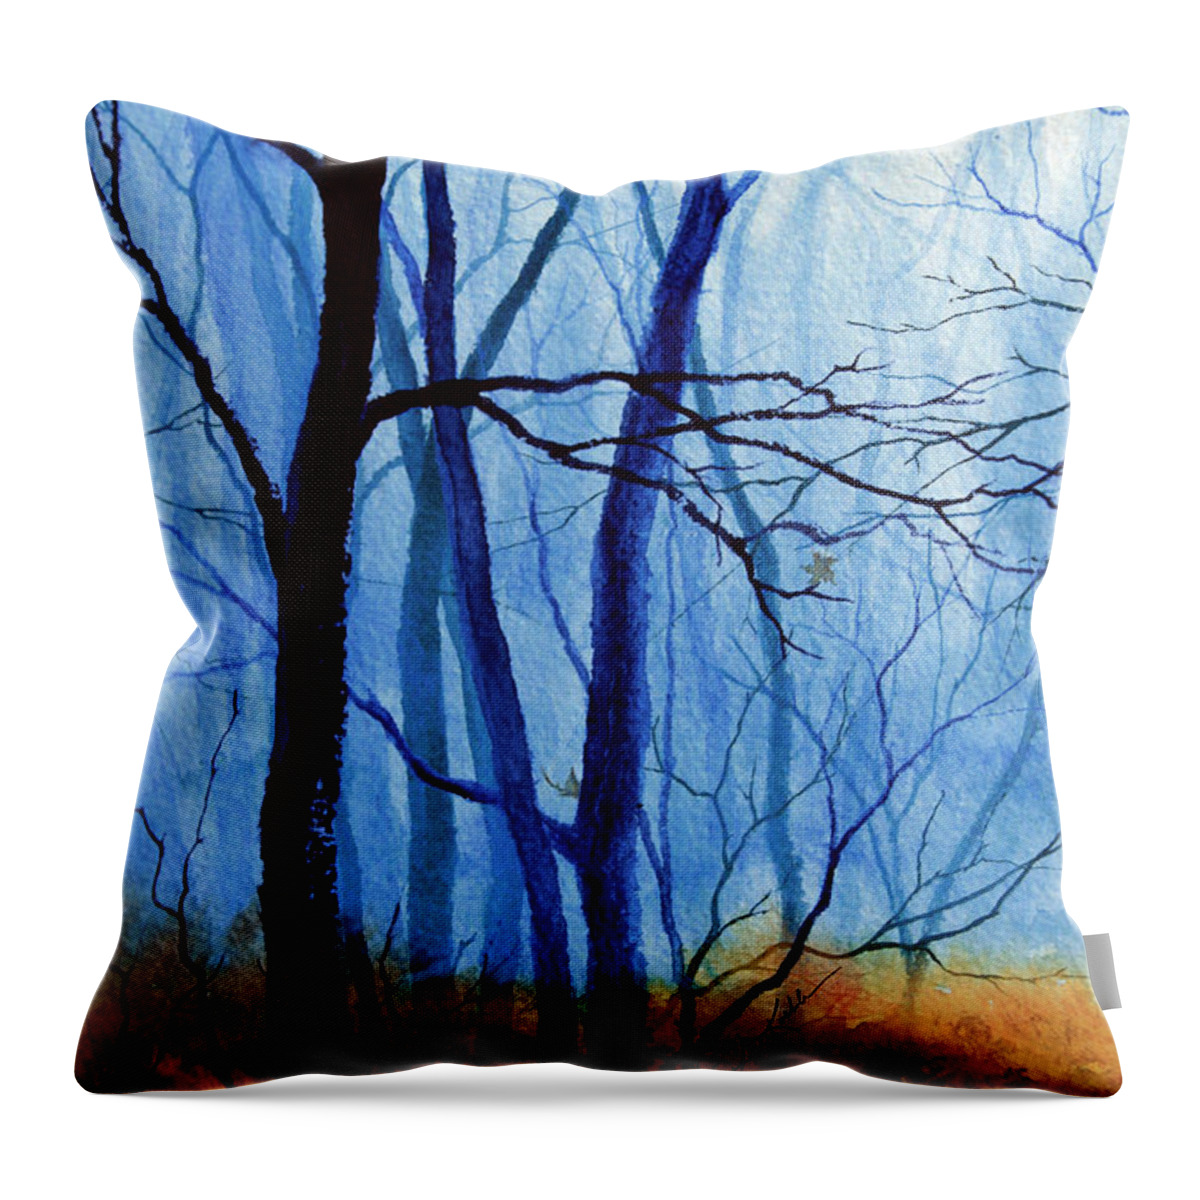 Misty Woods Throw Pillow featuring the painting Misty Woods - 1 by Hanne Lore Koehler